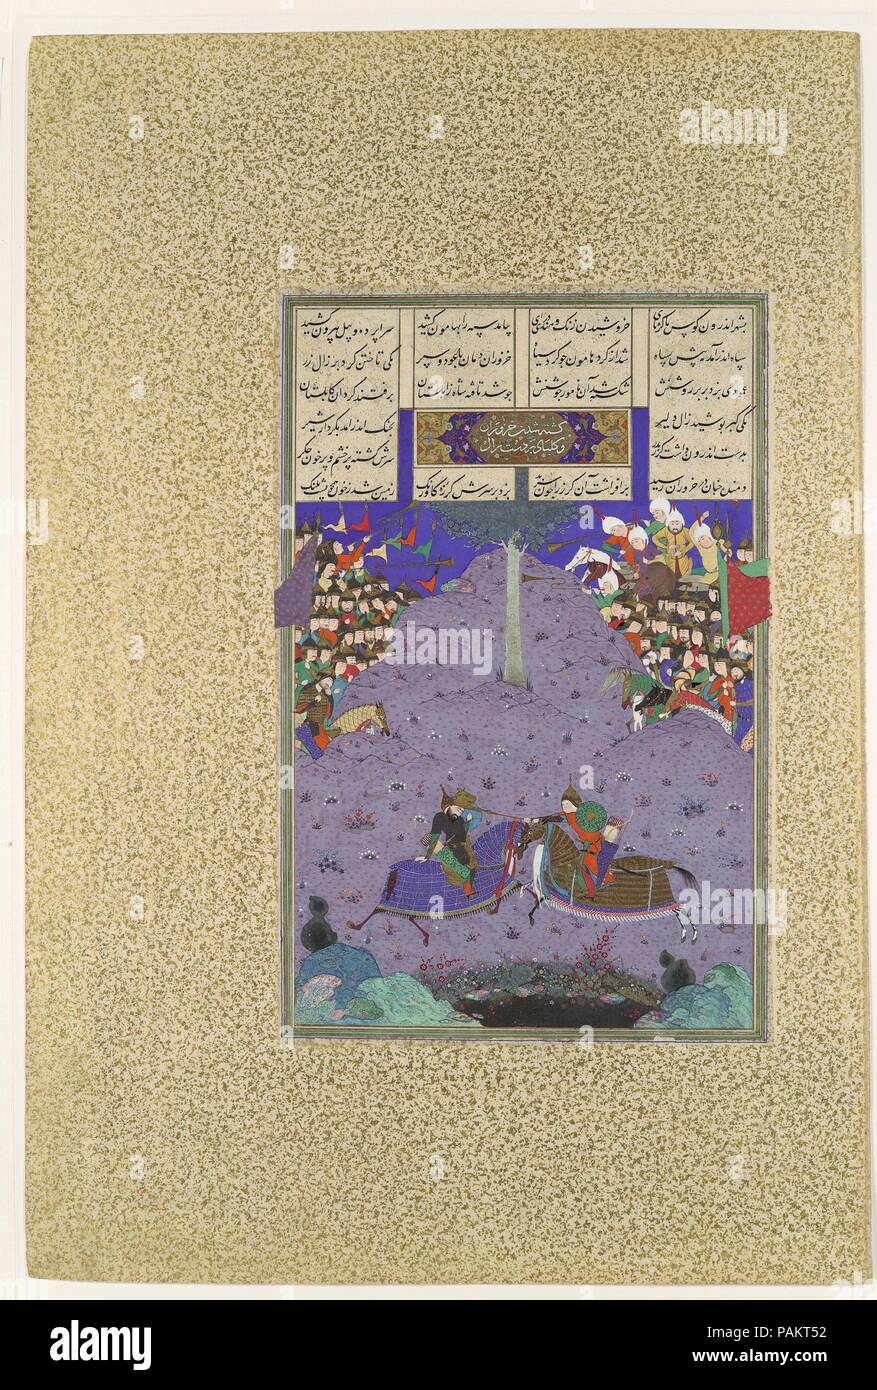 'Zal Slays Khazarvan', Folio 104r from the Shahnama (Book of Kings) of Shah Tahmasp. Artist: Painting attributed to 'Abd al-Vahhab. Author: Abu'l Qasim Firdausi (935-1020). Dimensions: Painting: H. 11 1/16 in. (28.1 cm)   W. 7 3/16 in. (18.3 cm)  Page: H. 18 9/16 in. (47.1 cm)   W. 12 7/16 in. (31.6 cm)  Mat: H. 22 in. (55.9 cm)  W. 16 in. (40.6 cm). Workshop director: Mir Musavvir (active 1525-60). Date: ca. 1525-30.  While Afrasiyab fights at Dahistan, a supplementary force is detailed to attack Zabul, home of Zal, of which Mihrab has been left in charge. Through bribery and persuasion, he k Stock Photo